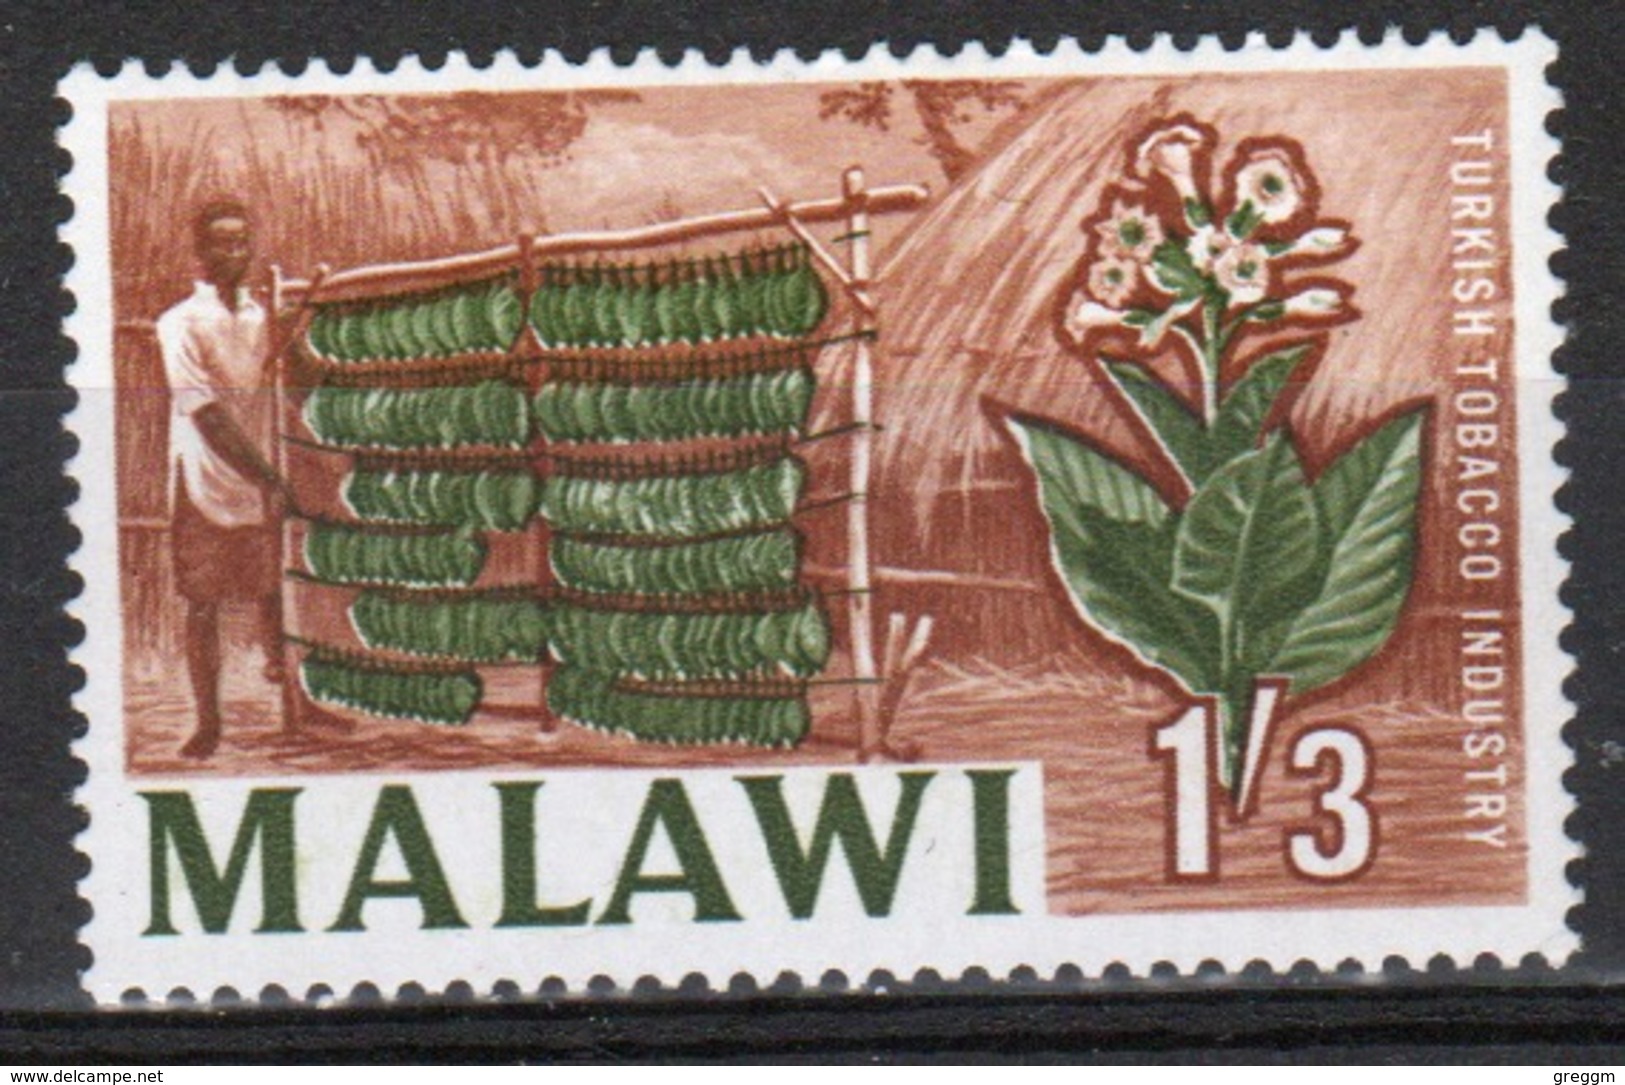 Malawi 1964 Single 1/3d Stamp From The Definitive Set. - Malawi (1964-...)